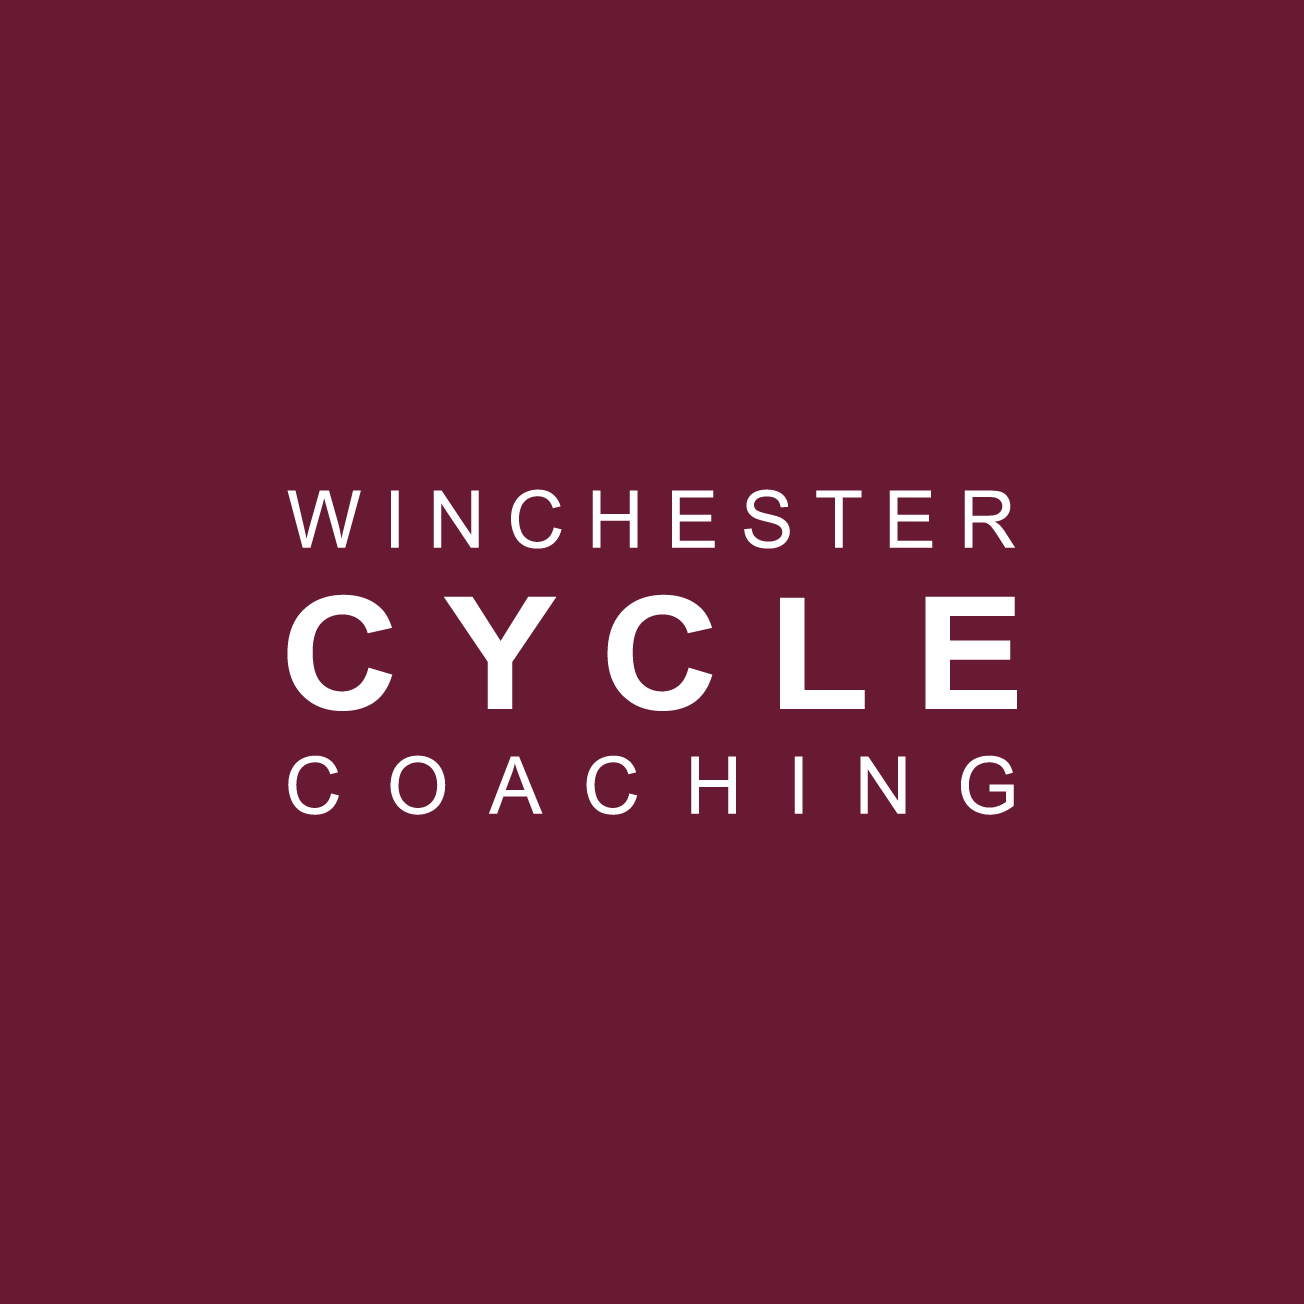 Club Image for WINCHESTER CYCLE COACHING